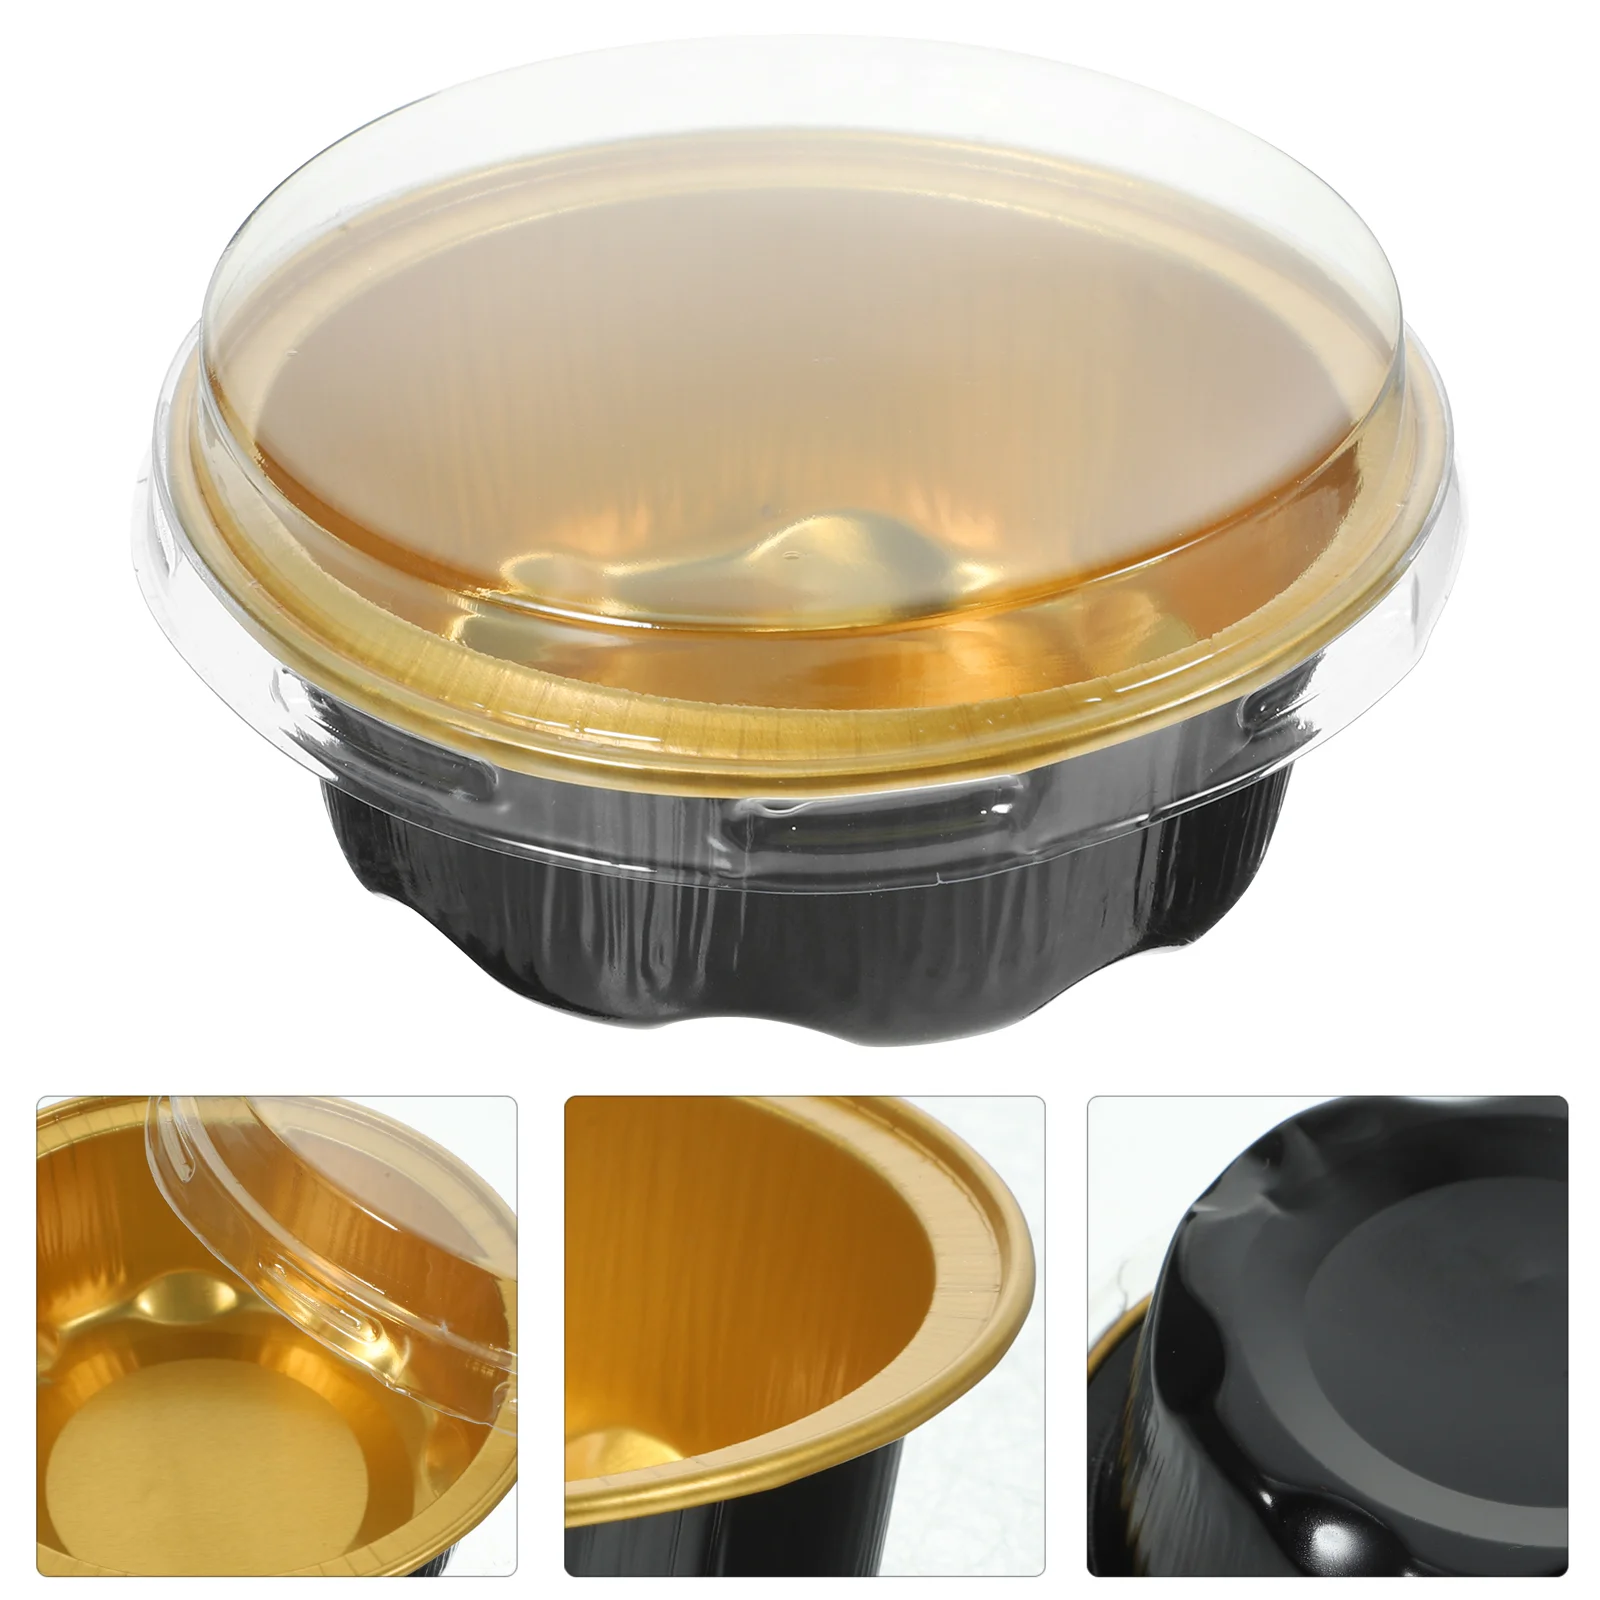 

100pcs Individual Cake Pans with Lids Muffin Molds for Baking Pudding Mold Egg Tart Baking Molds